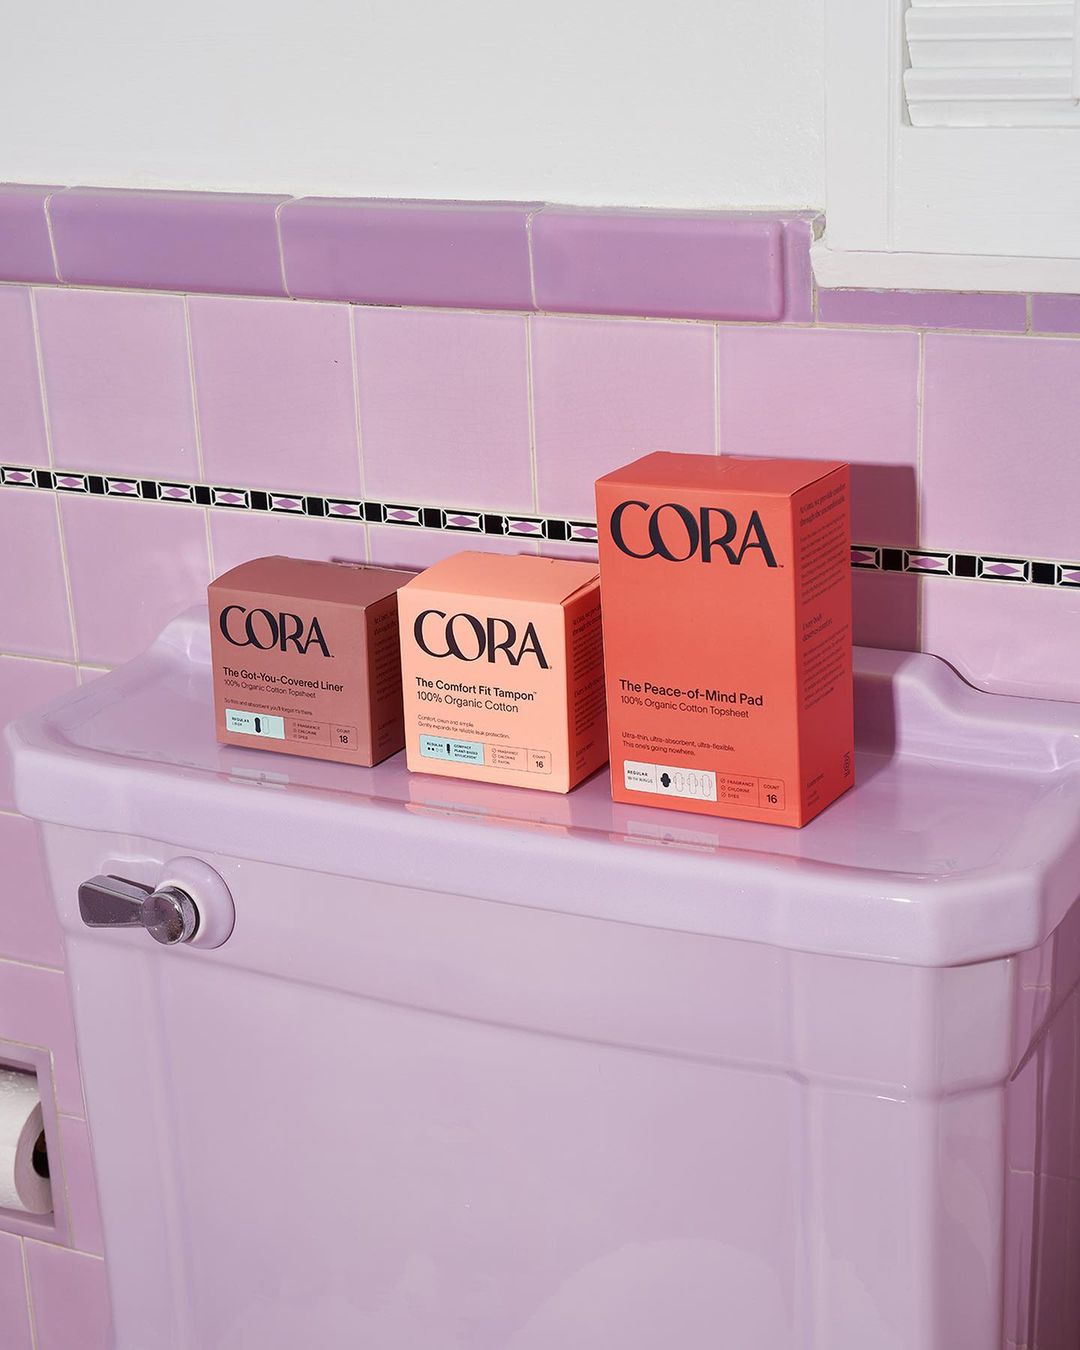 Cora packaging sitting on the back of the toilet